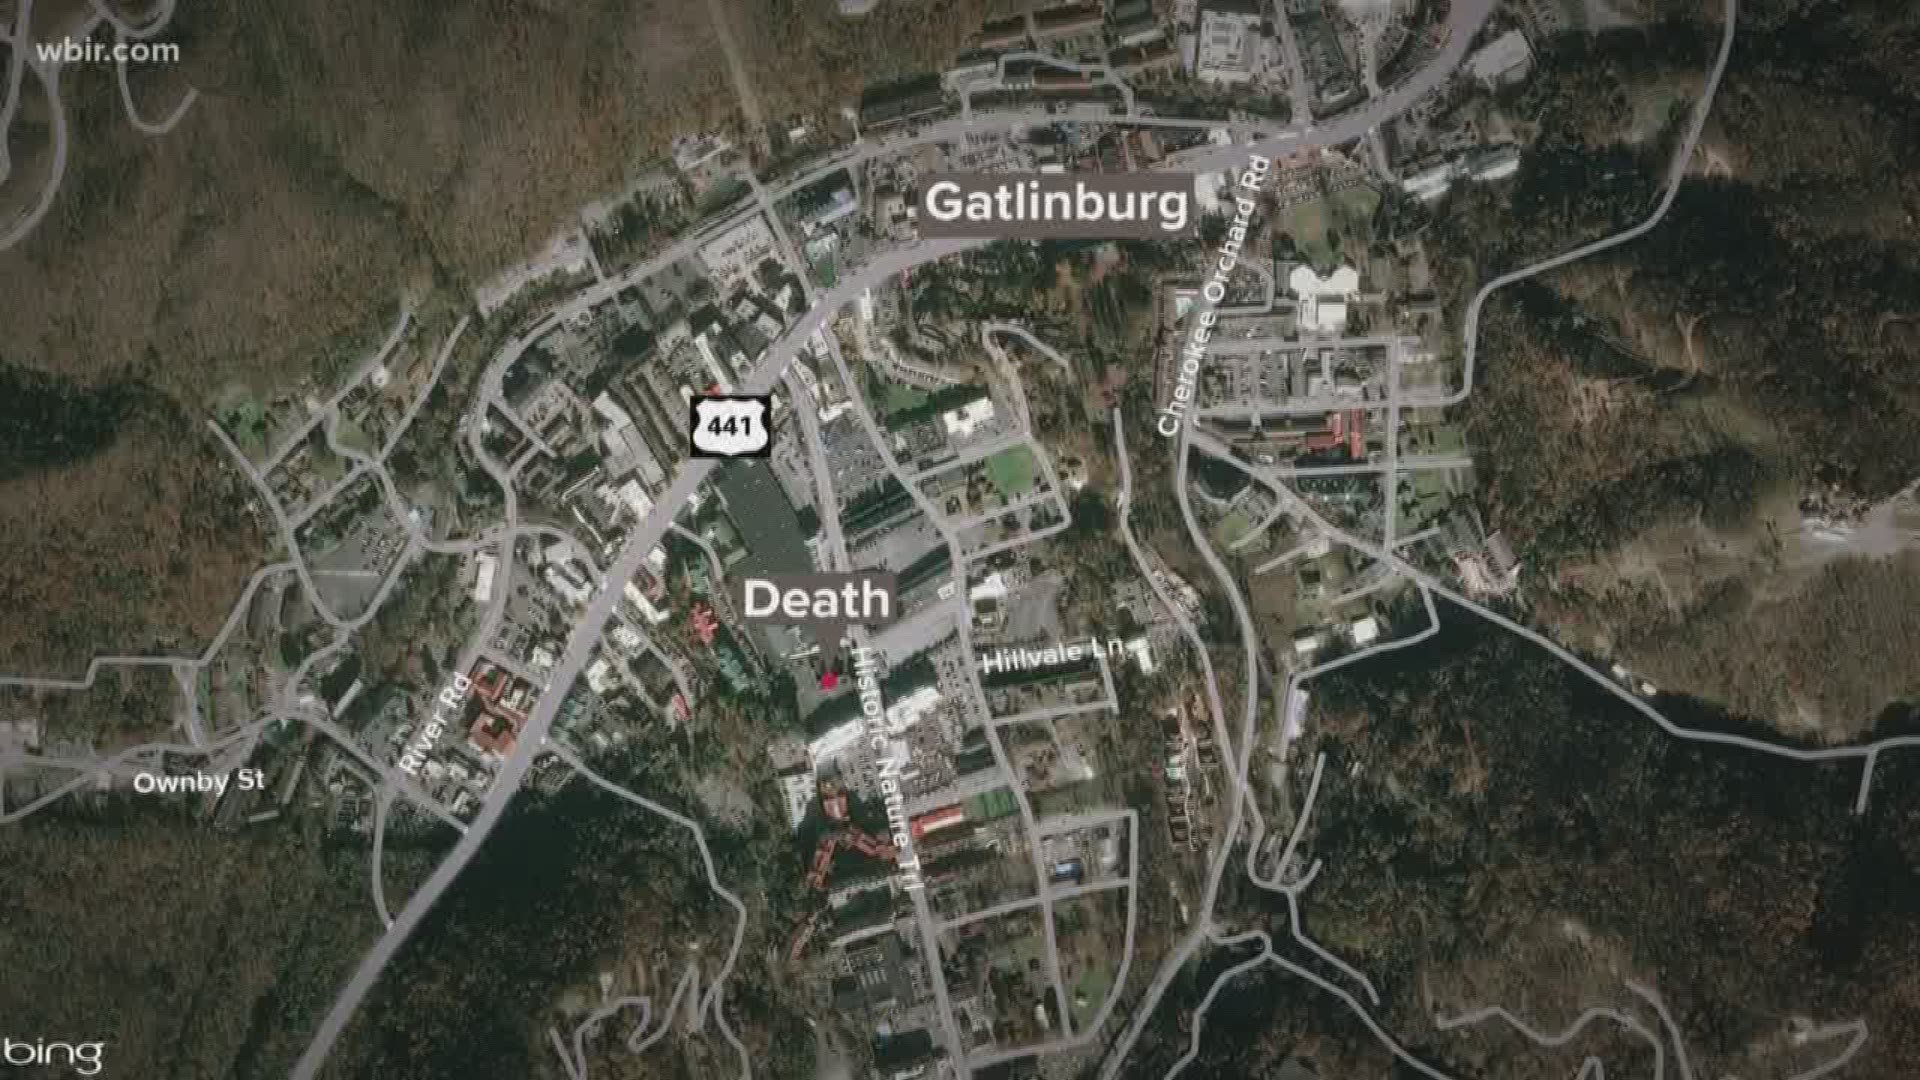 Witnesses told investigators the man appeared to be in medical distress and collapsed at the scene. Gatlinburg Police determined that there was no foul play involved.